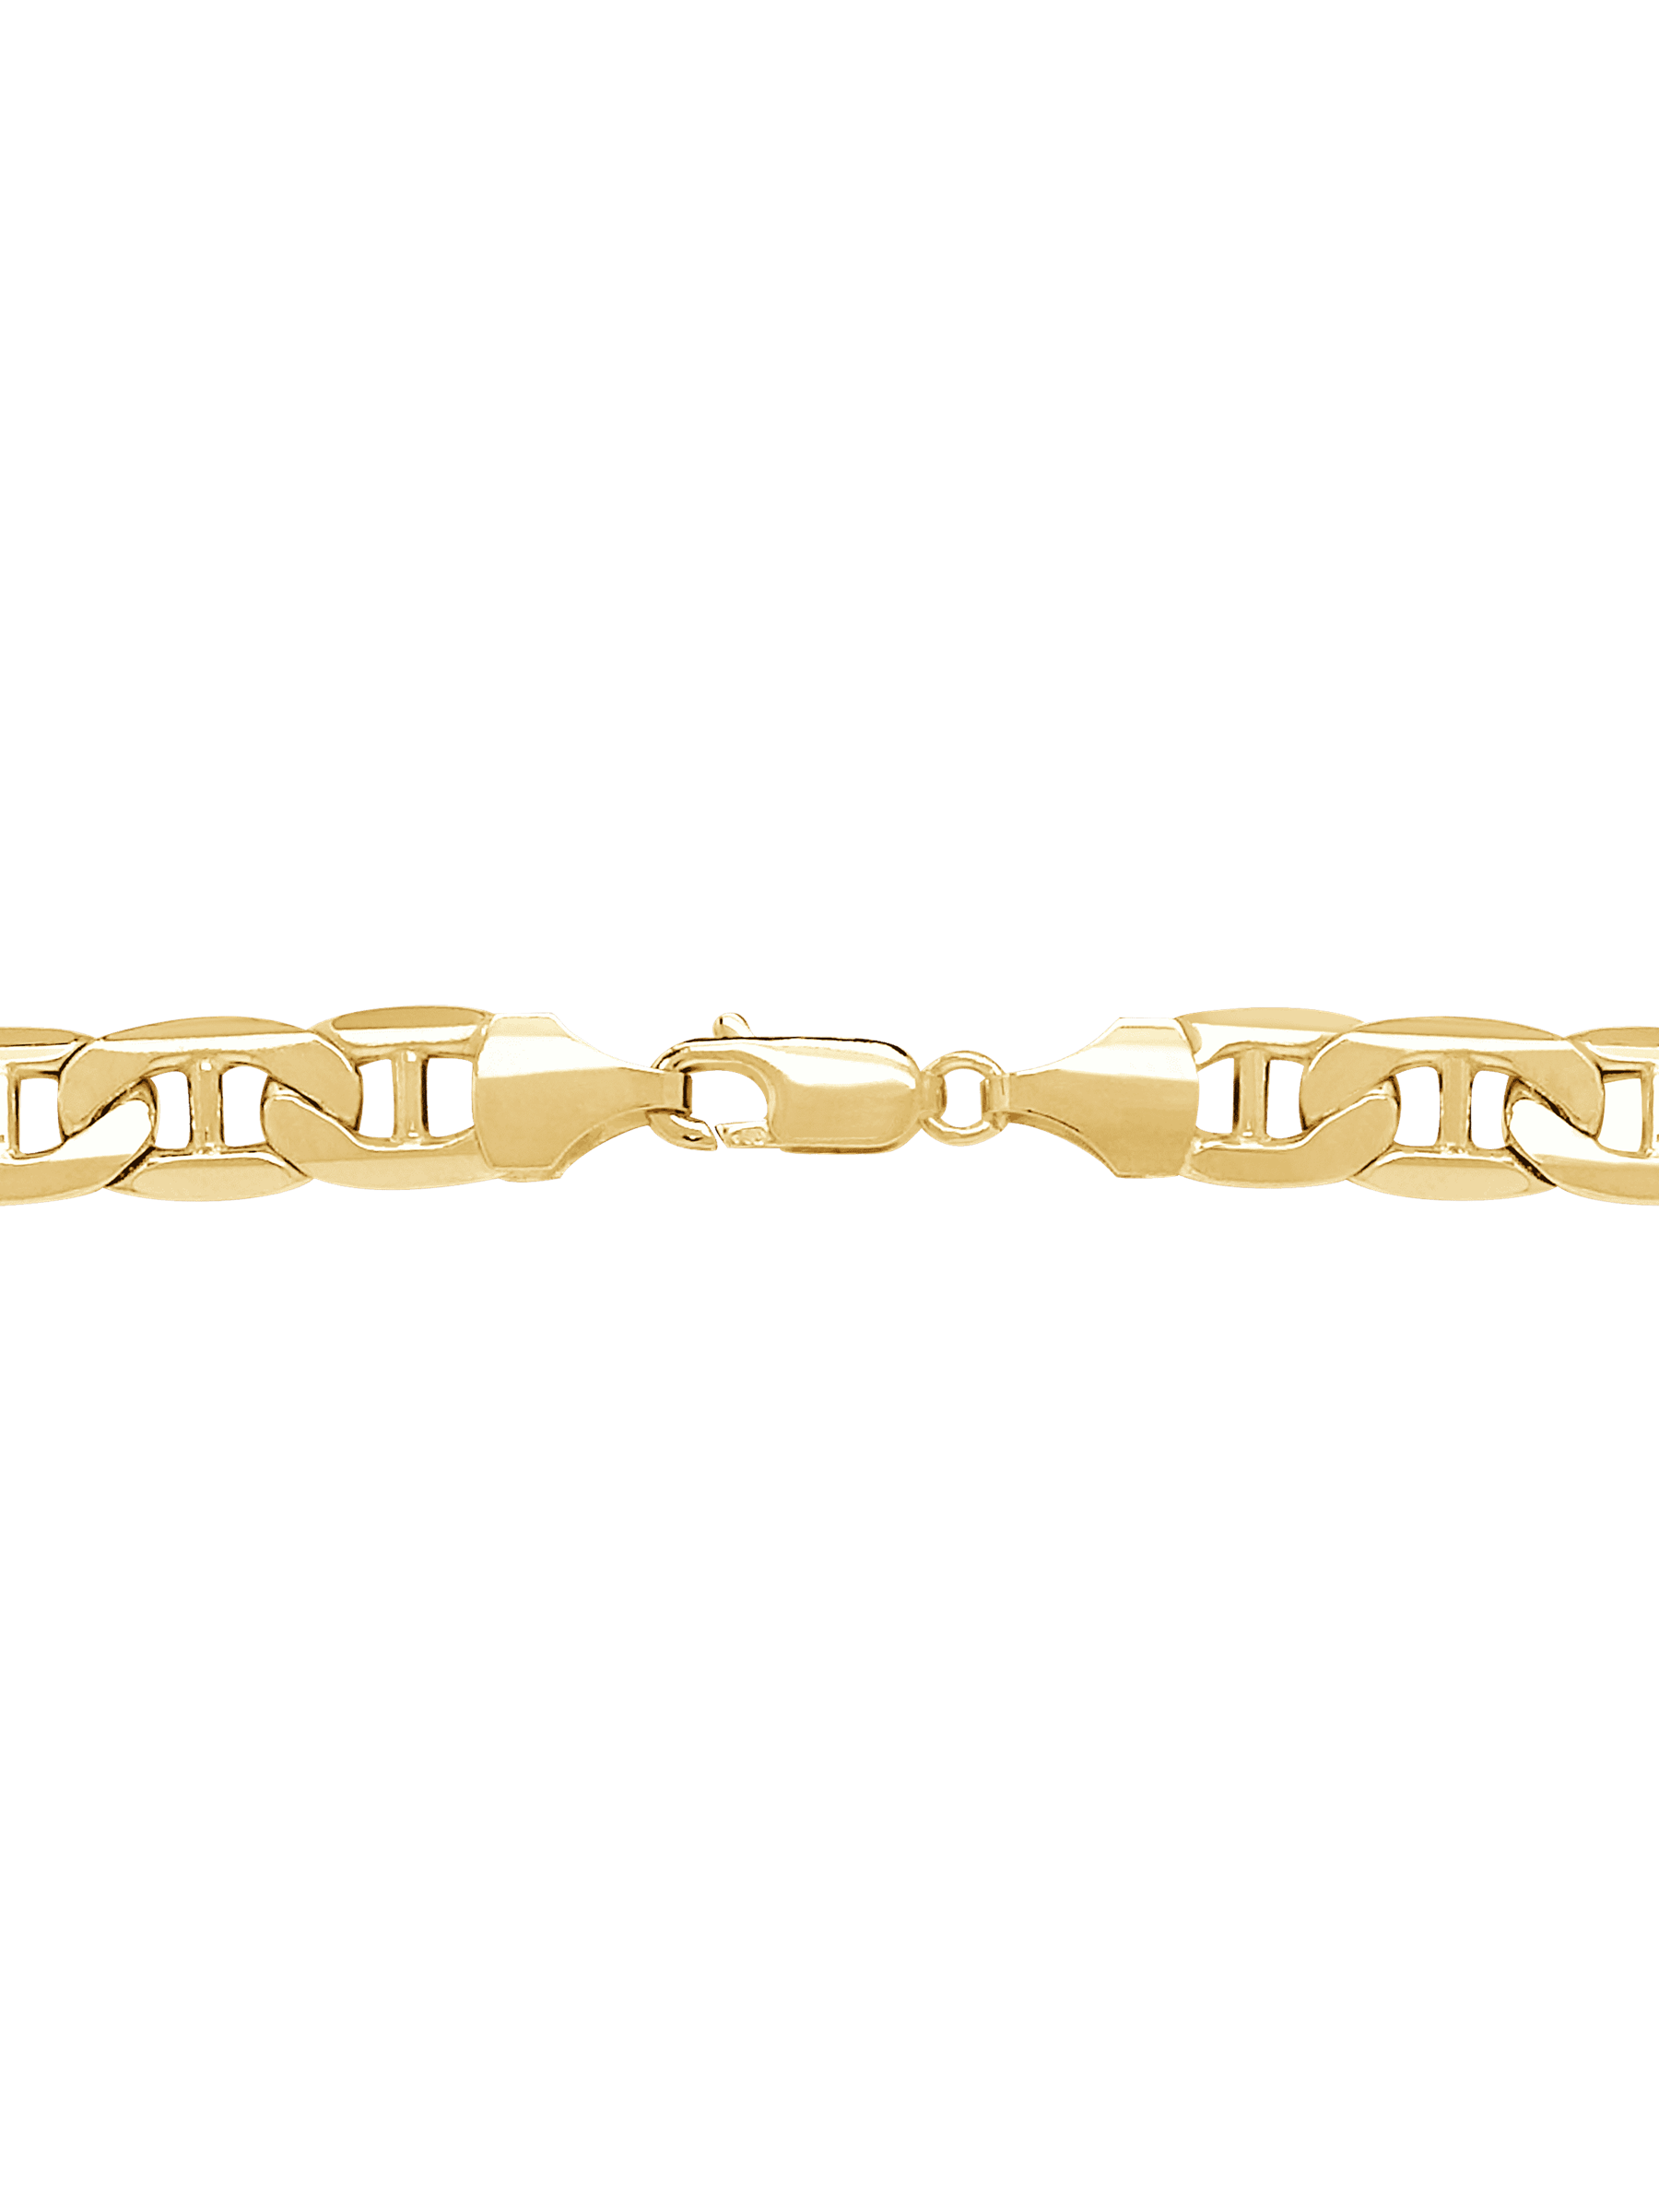 Welry Men's Italian-Made 7.2mm Beveled Mariner Link Chain Necklace in 10kt Yellow Gold, 22" - image 3 of 4